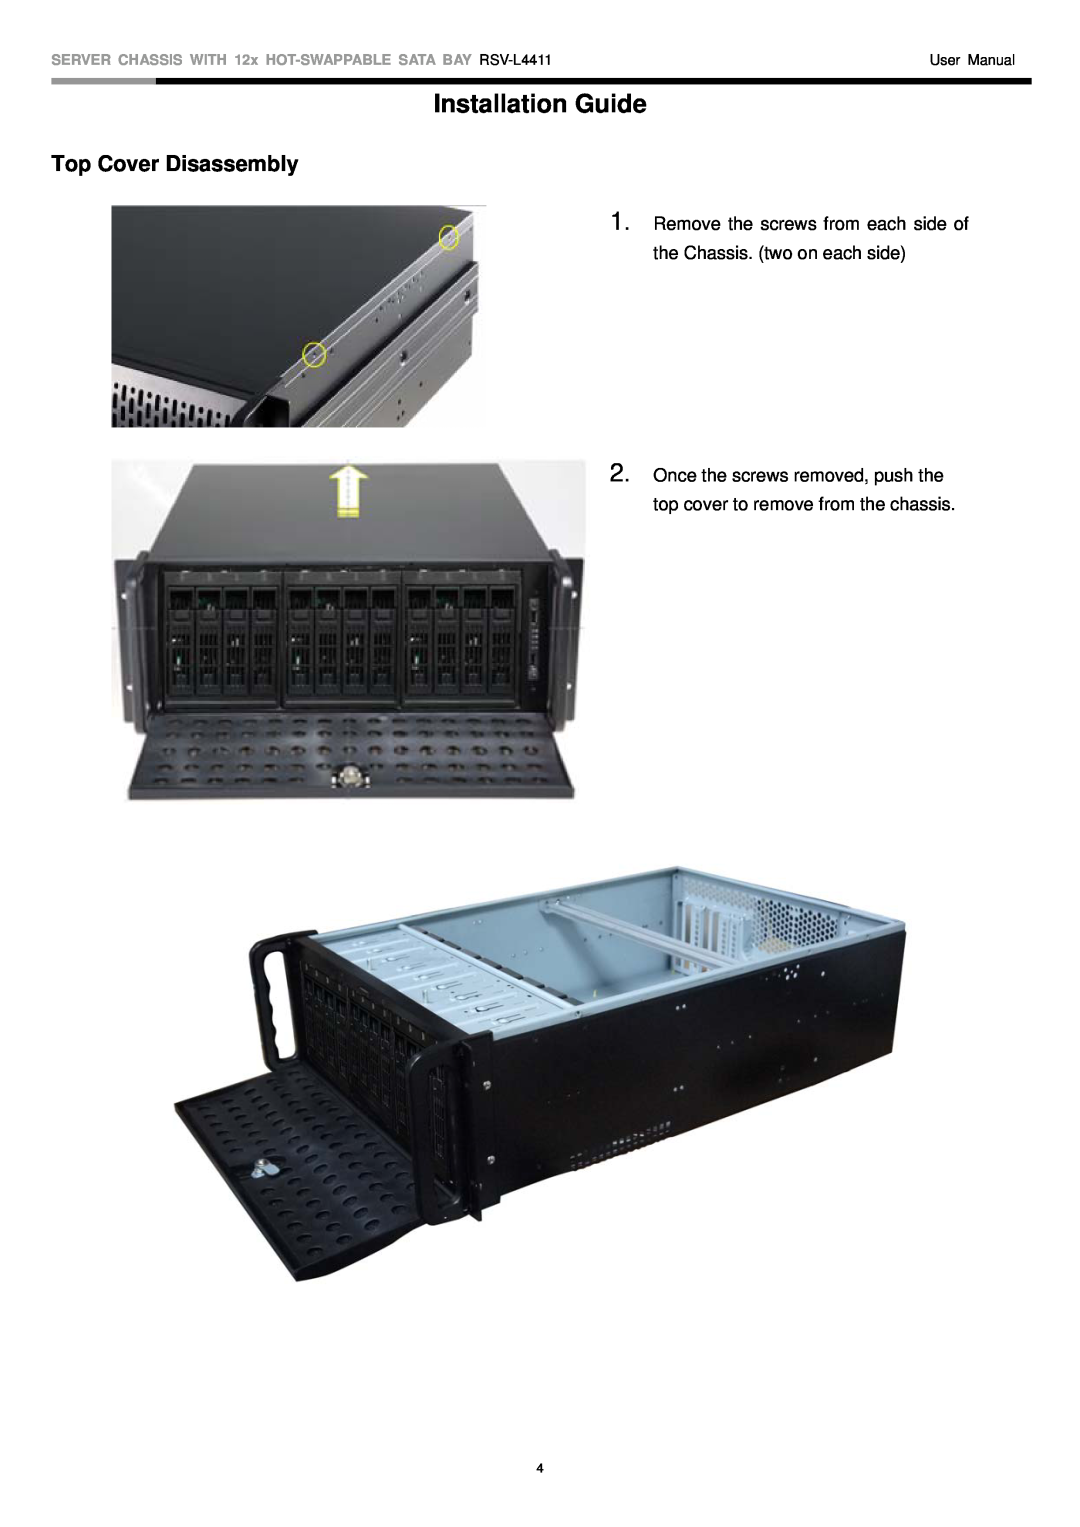 Rosewill user manual Installation Guide, Top Cover Disassembly, SERVER CHASSIS WITH 12x HOT-SWAPPABLE SATA BAY RSV-L4411 